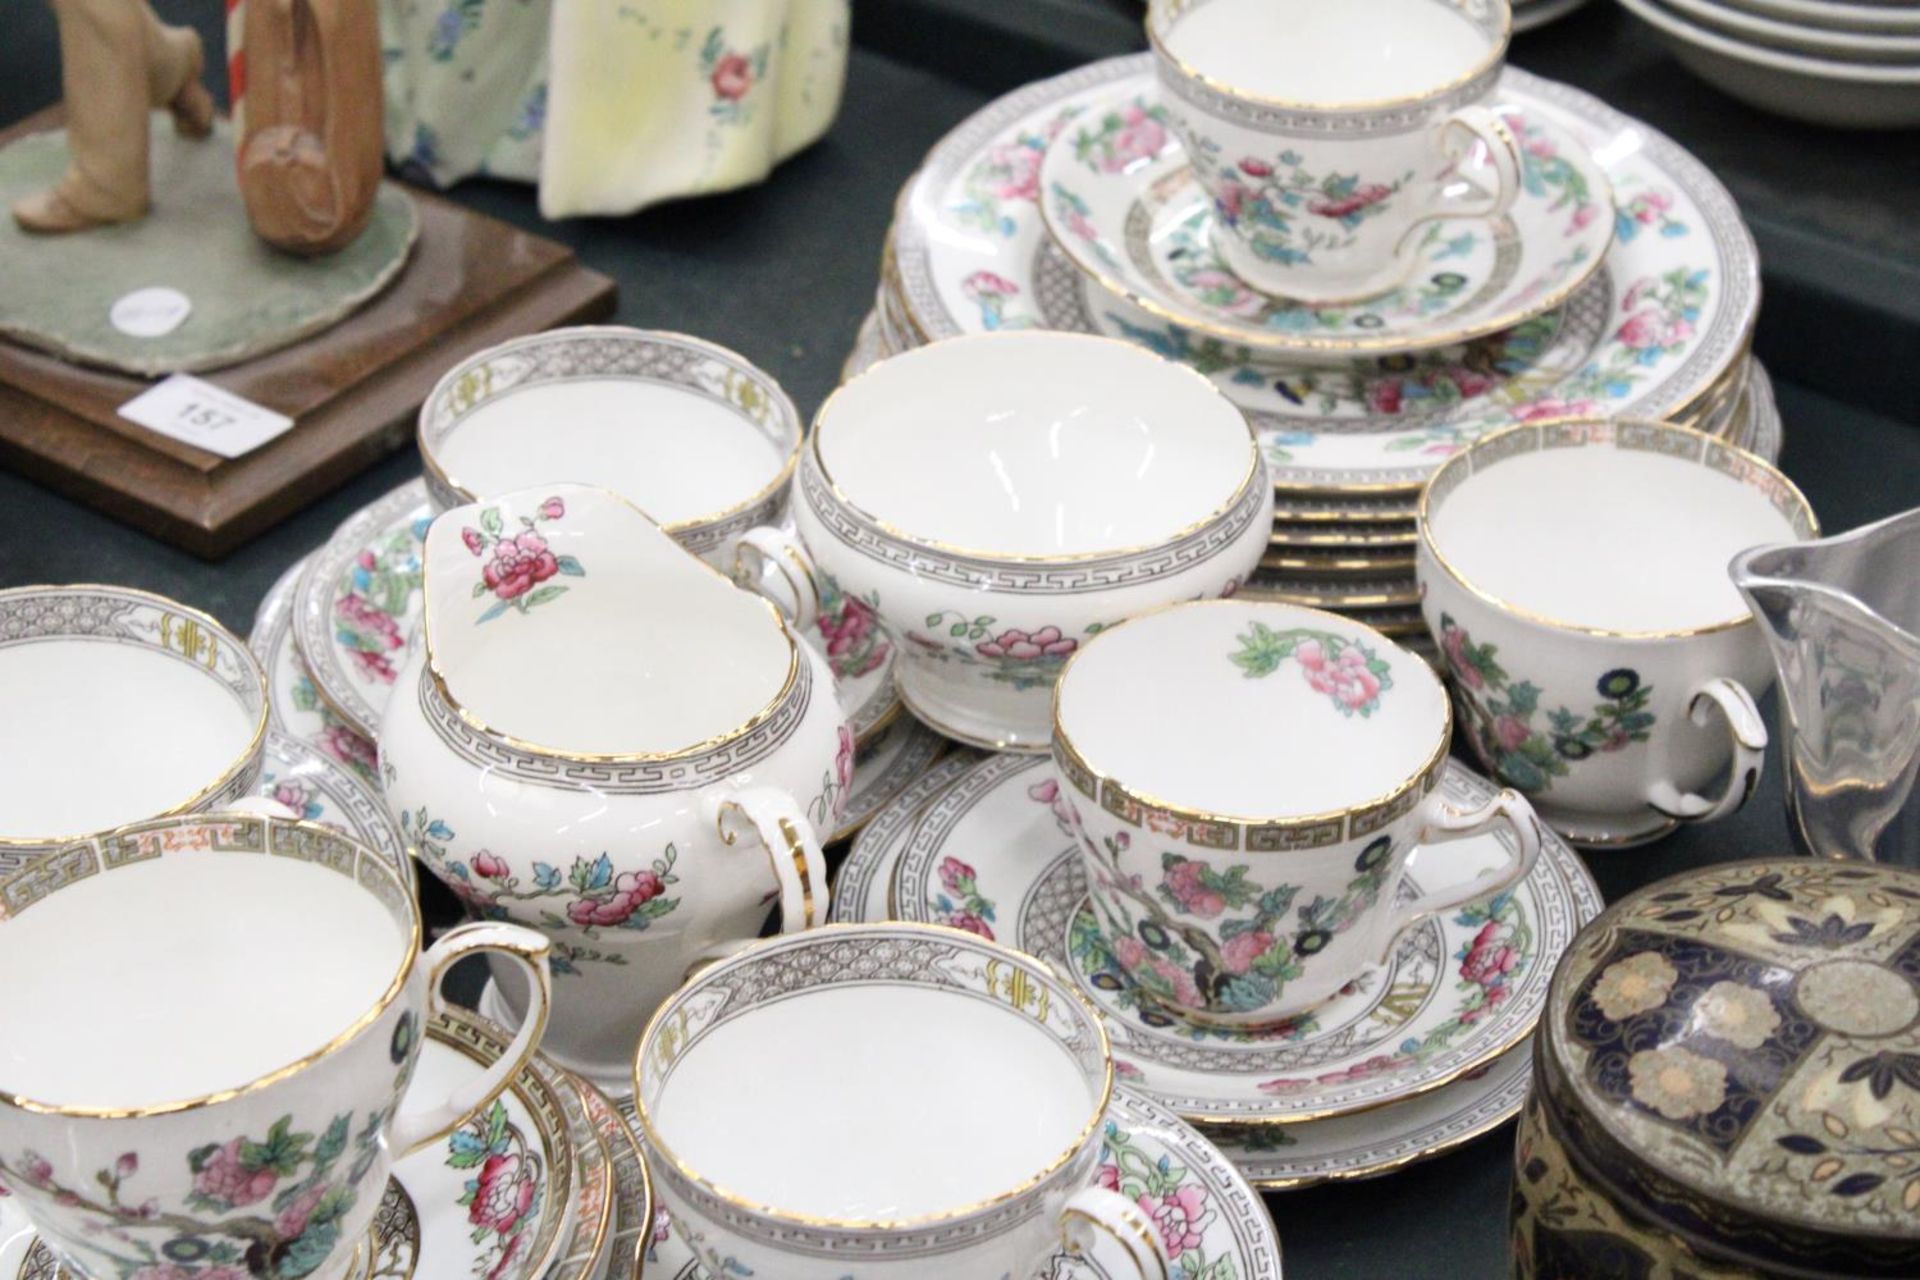 A VINTAGE AYNSLEY 'INDIAN TREE' TEASET TO INCLUDE, A CREAM JUG, SUGAR BOWL, CUPS, SAUCERS AND SIDE - Image 6 of 6